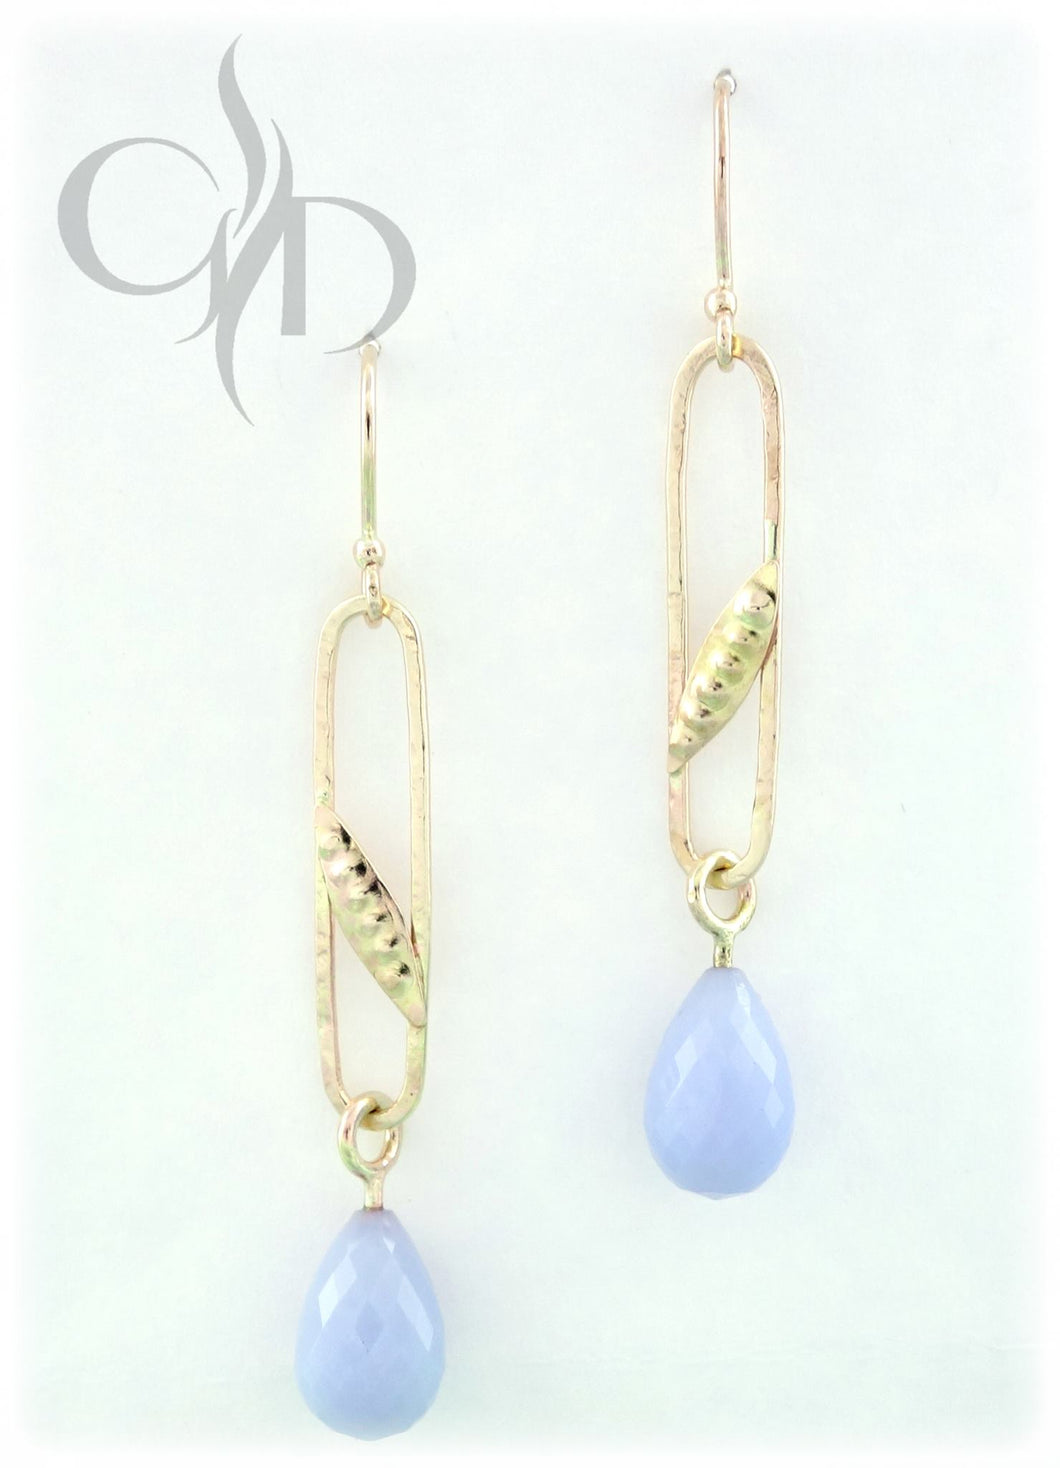 14K gold dangle earrings with blue chalcedony briolettes